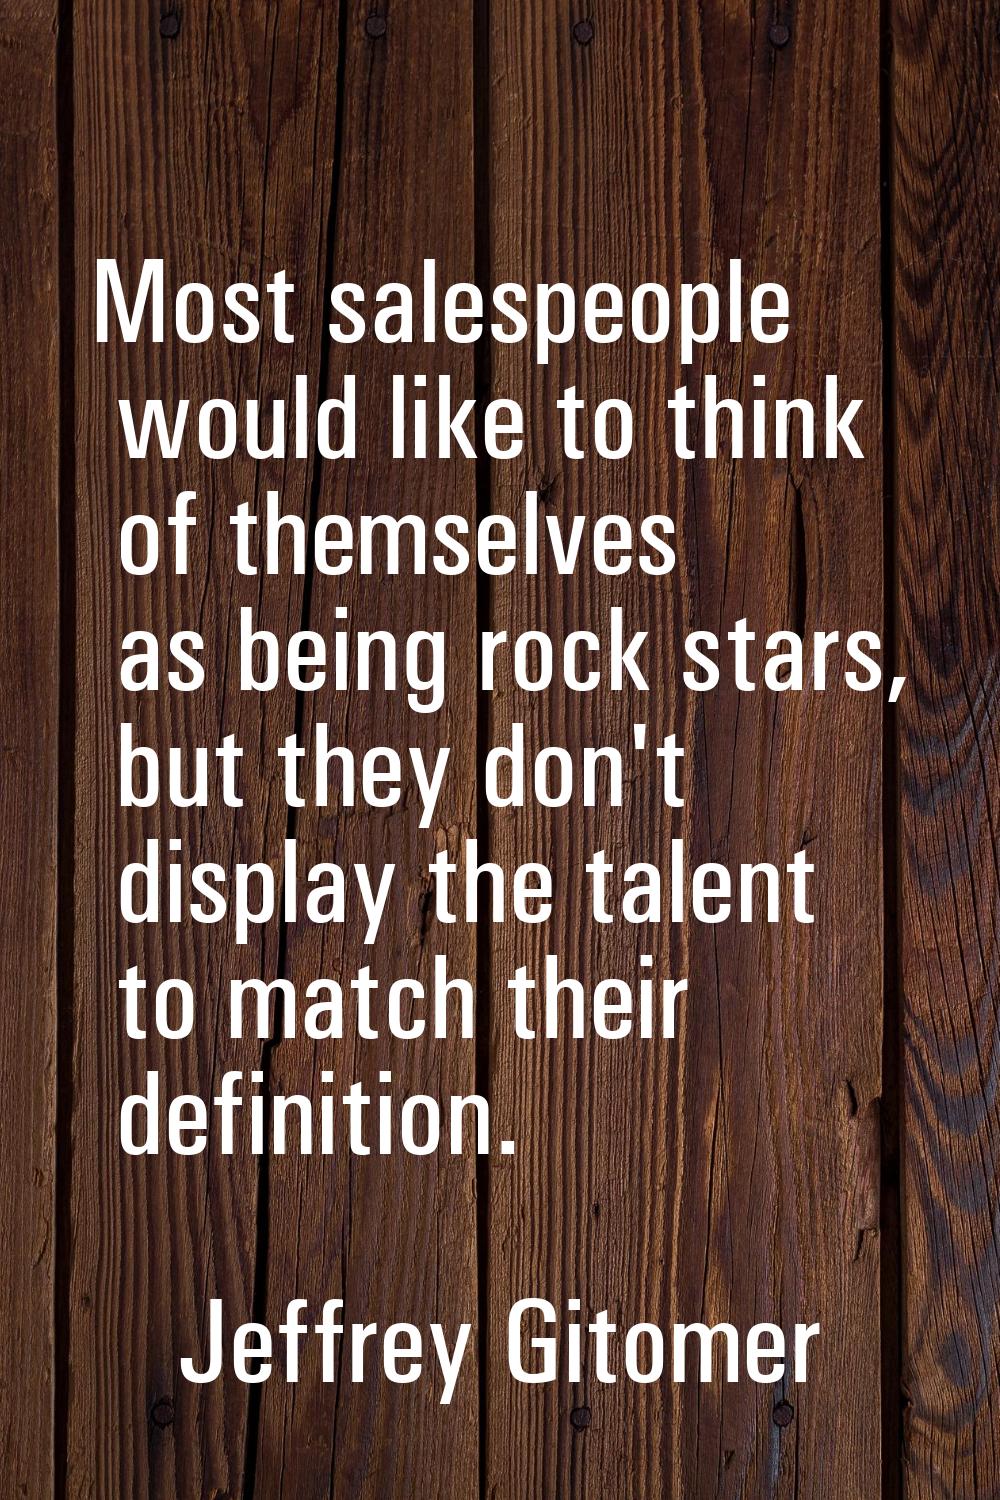 Most salespeople would like to think of themselves as being rock stars, but they don't display the 